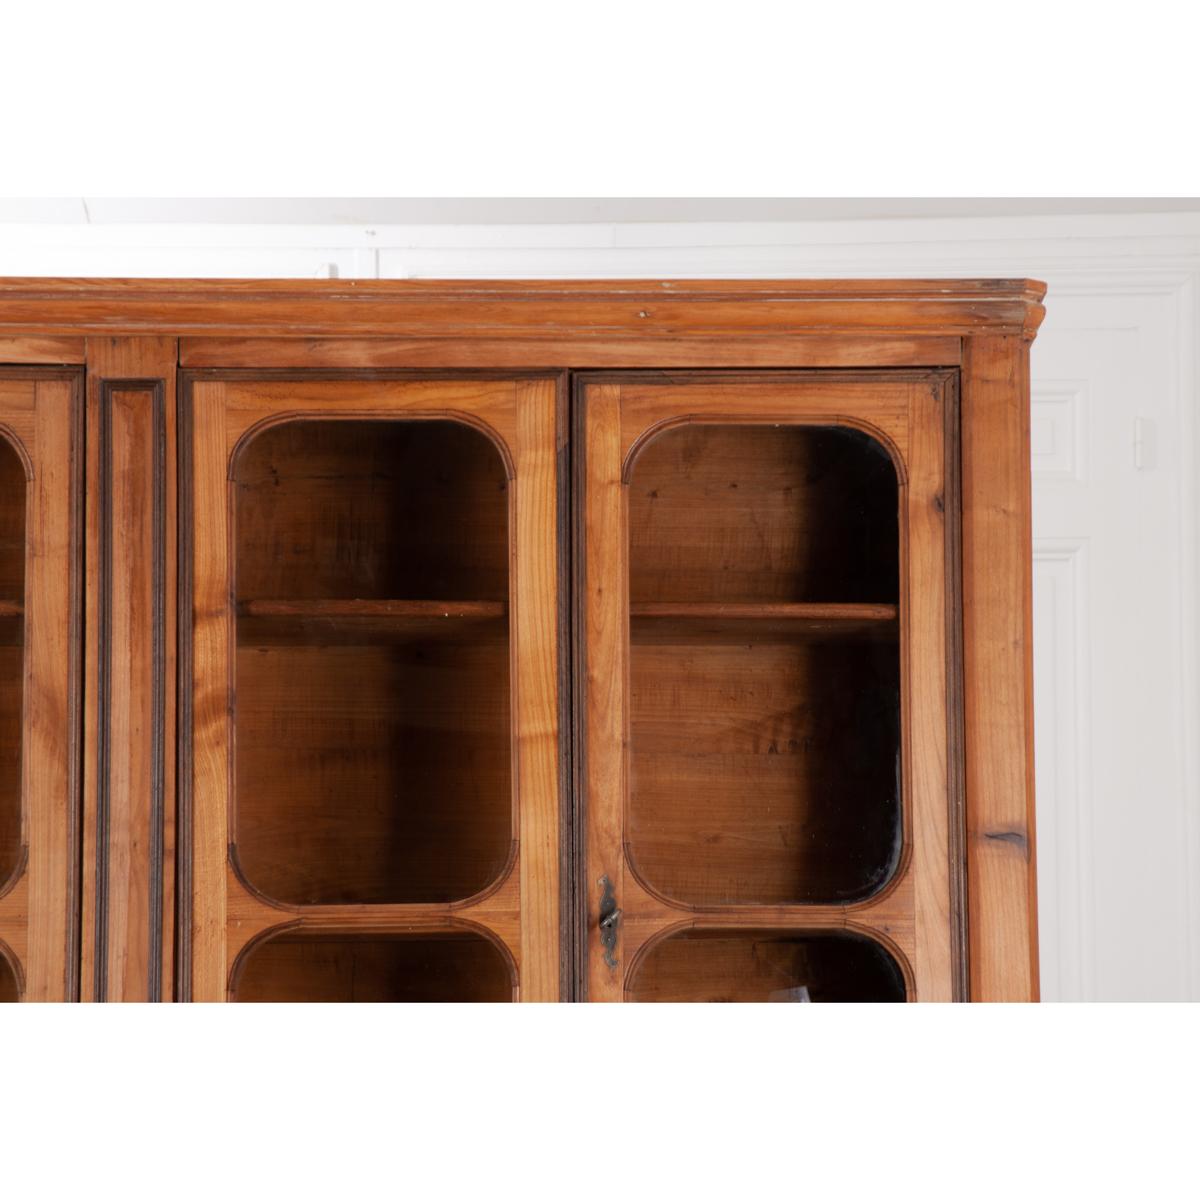 This Louis Philippe inspired bibliotheque is made of solid pine with walnut trim. It has eight doors and four drawers. The four glass front, locking and latching upper doors close before three adjustable full length shelves. There are two keys that